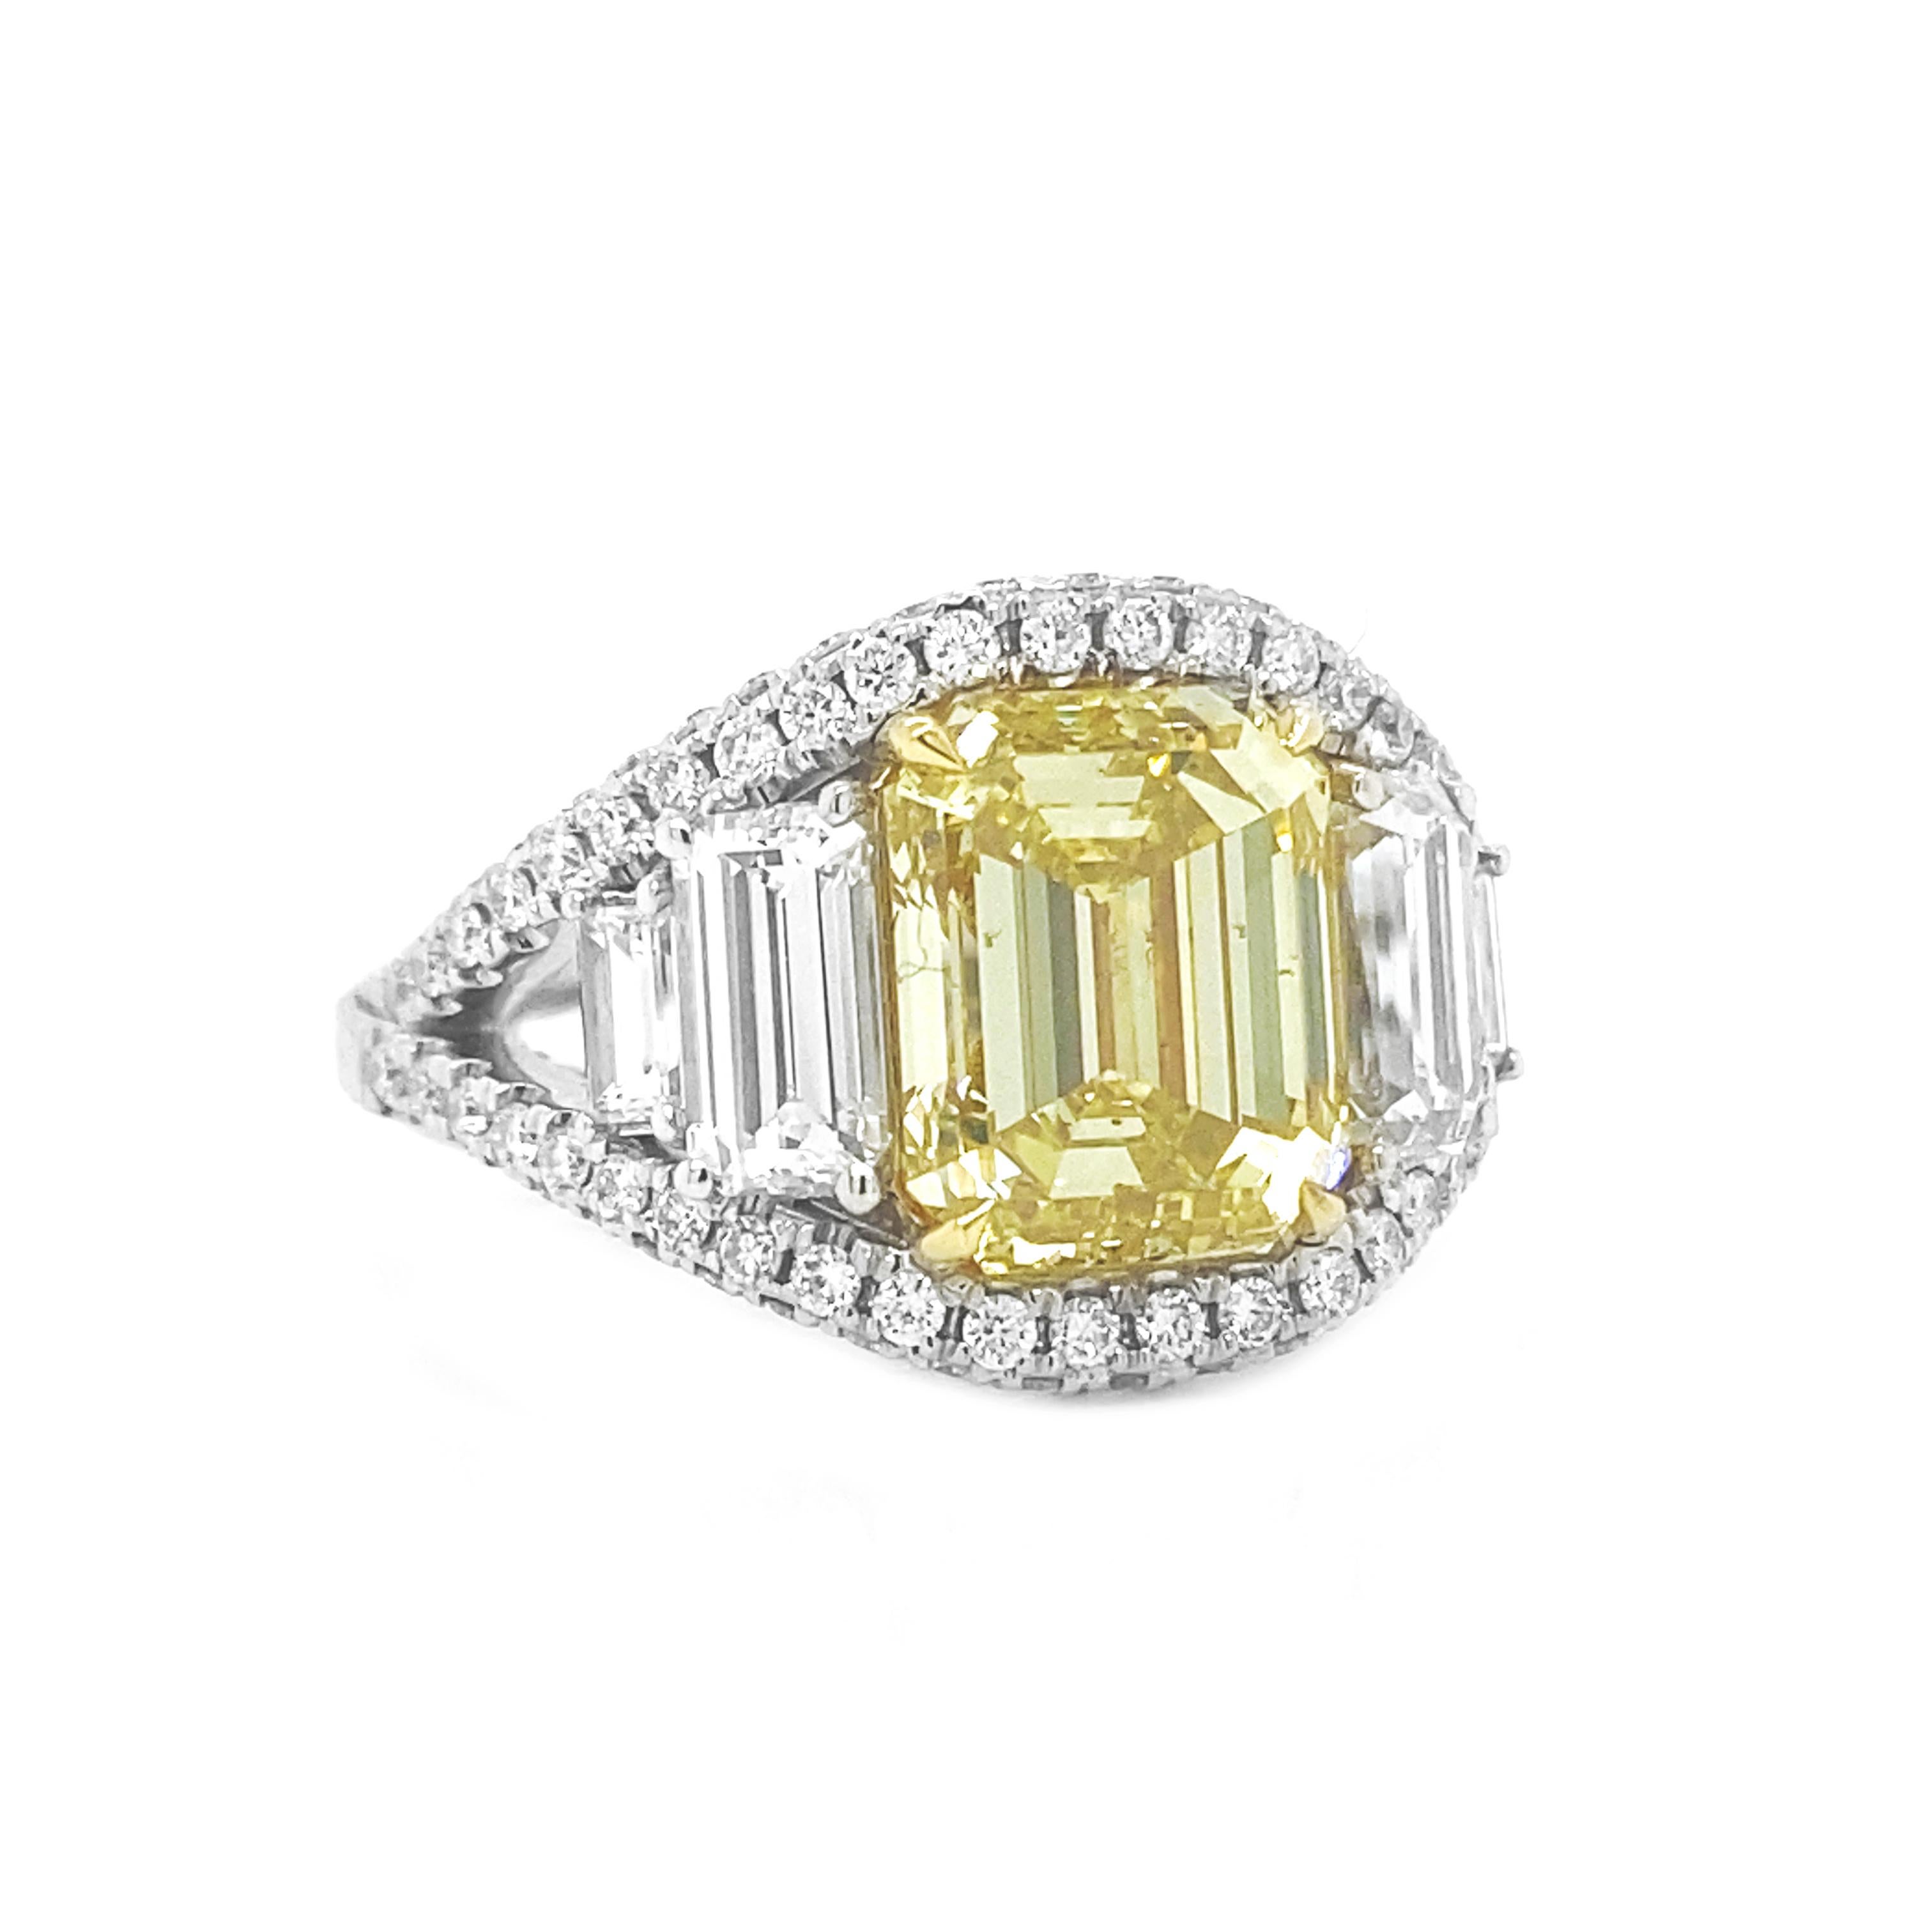 Exquisite 6.30 Carat Total Weight Natural Fancy Yellow Emerald GIA Certified Diamond Cluster Ring - 18KT Gold

Description:
Step into luxury with our Exquisite 6.30 Carat Total Weight Natural Fancy Yellow Emerald GIA Certified Diamond Cluster Ring,